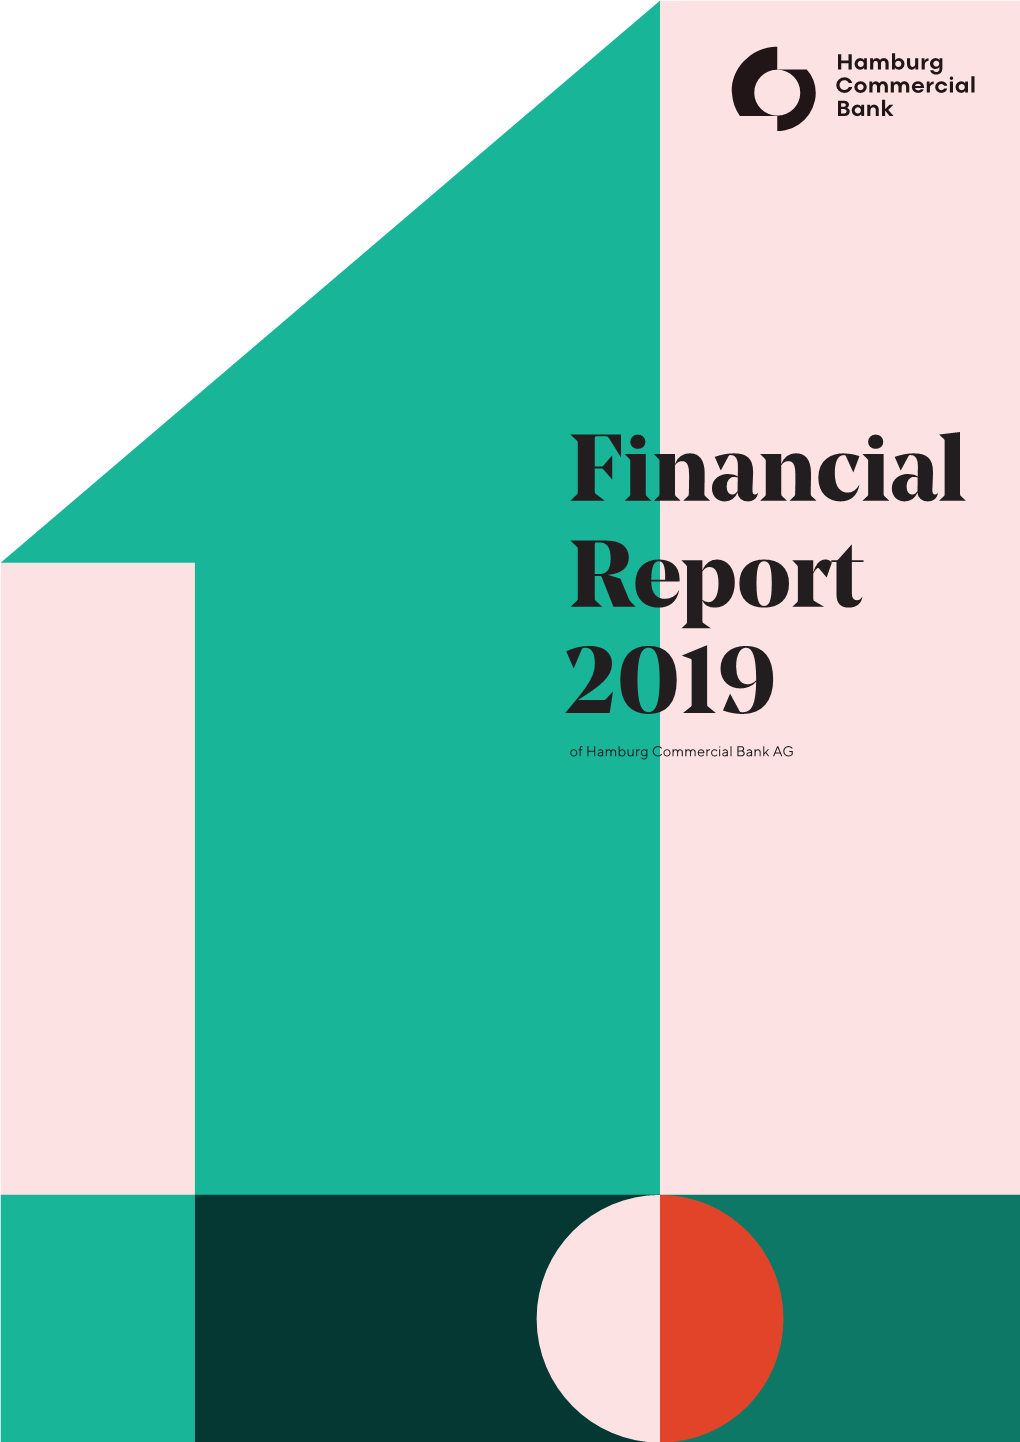 Financial Report 2019 of Hamburg Commercial Bank AG Contents